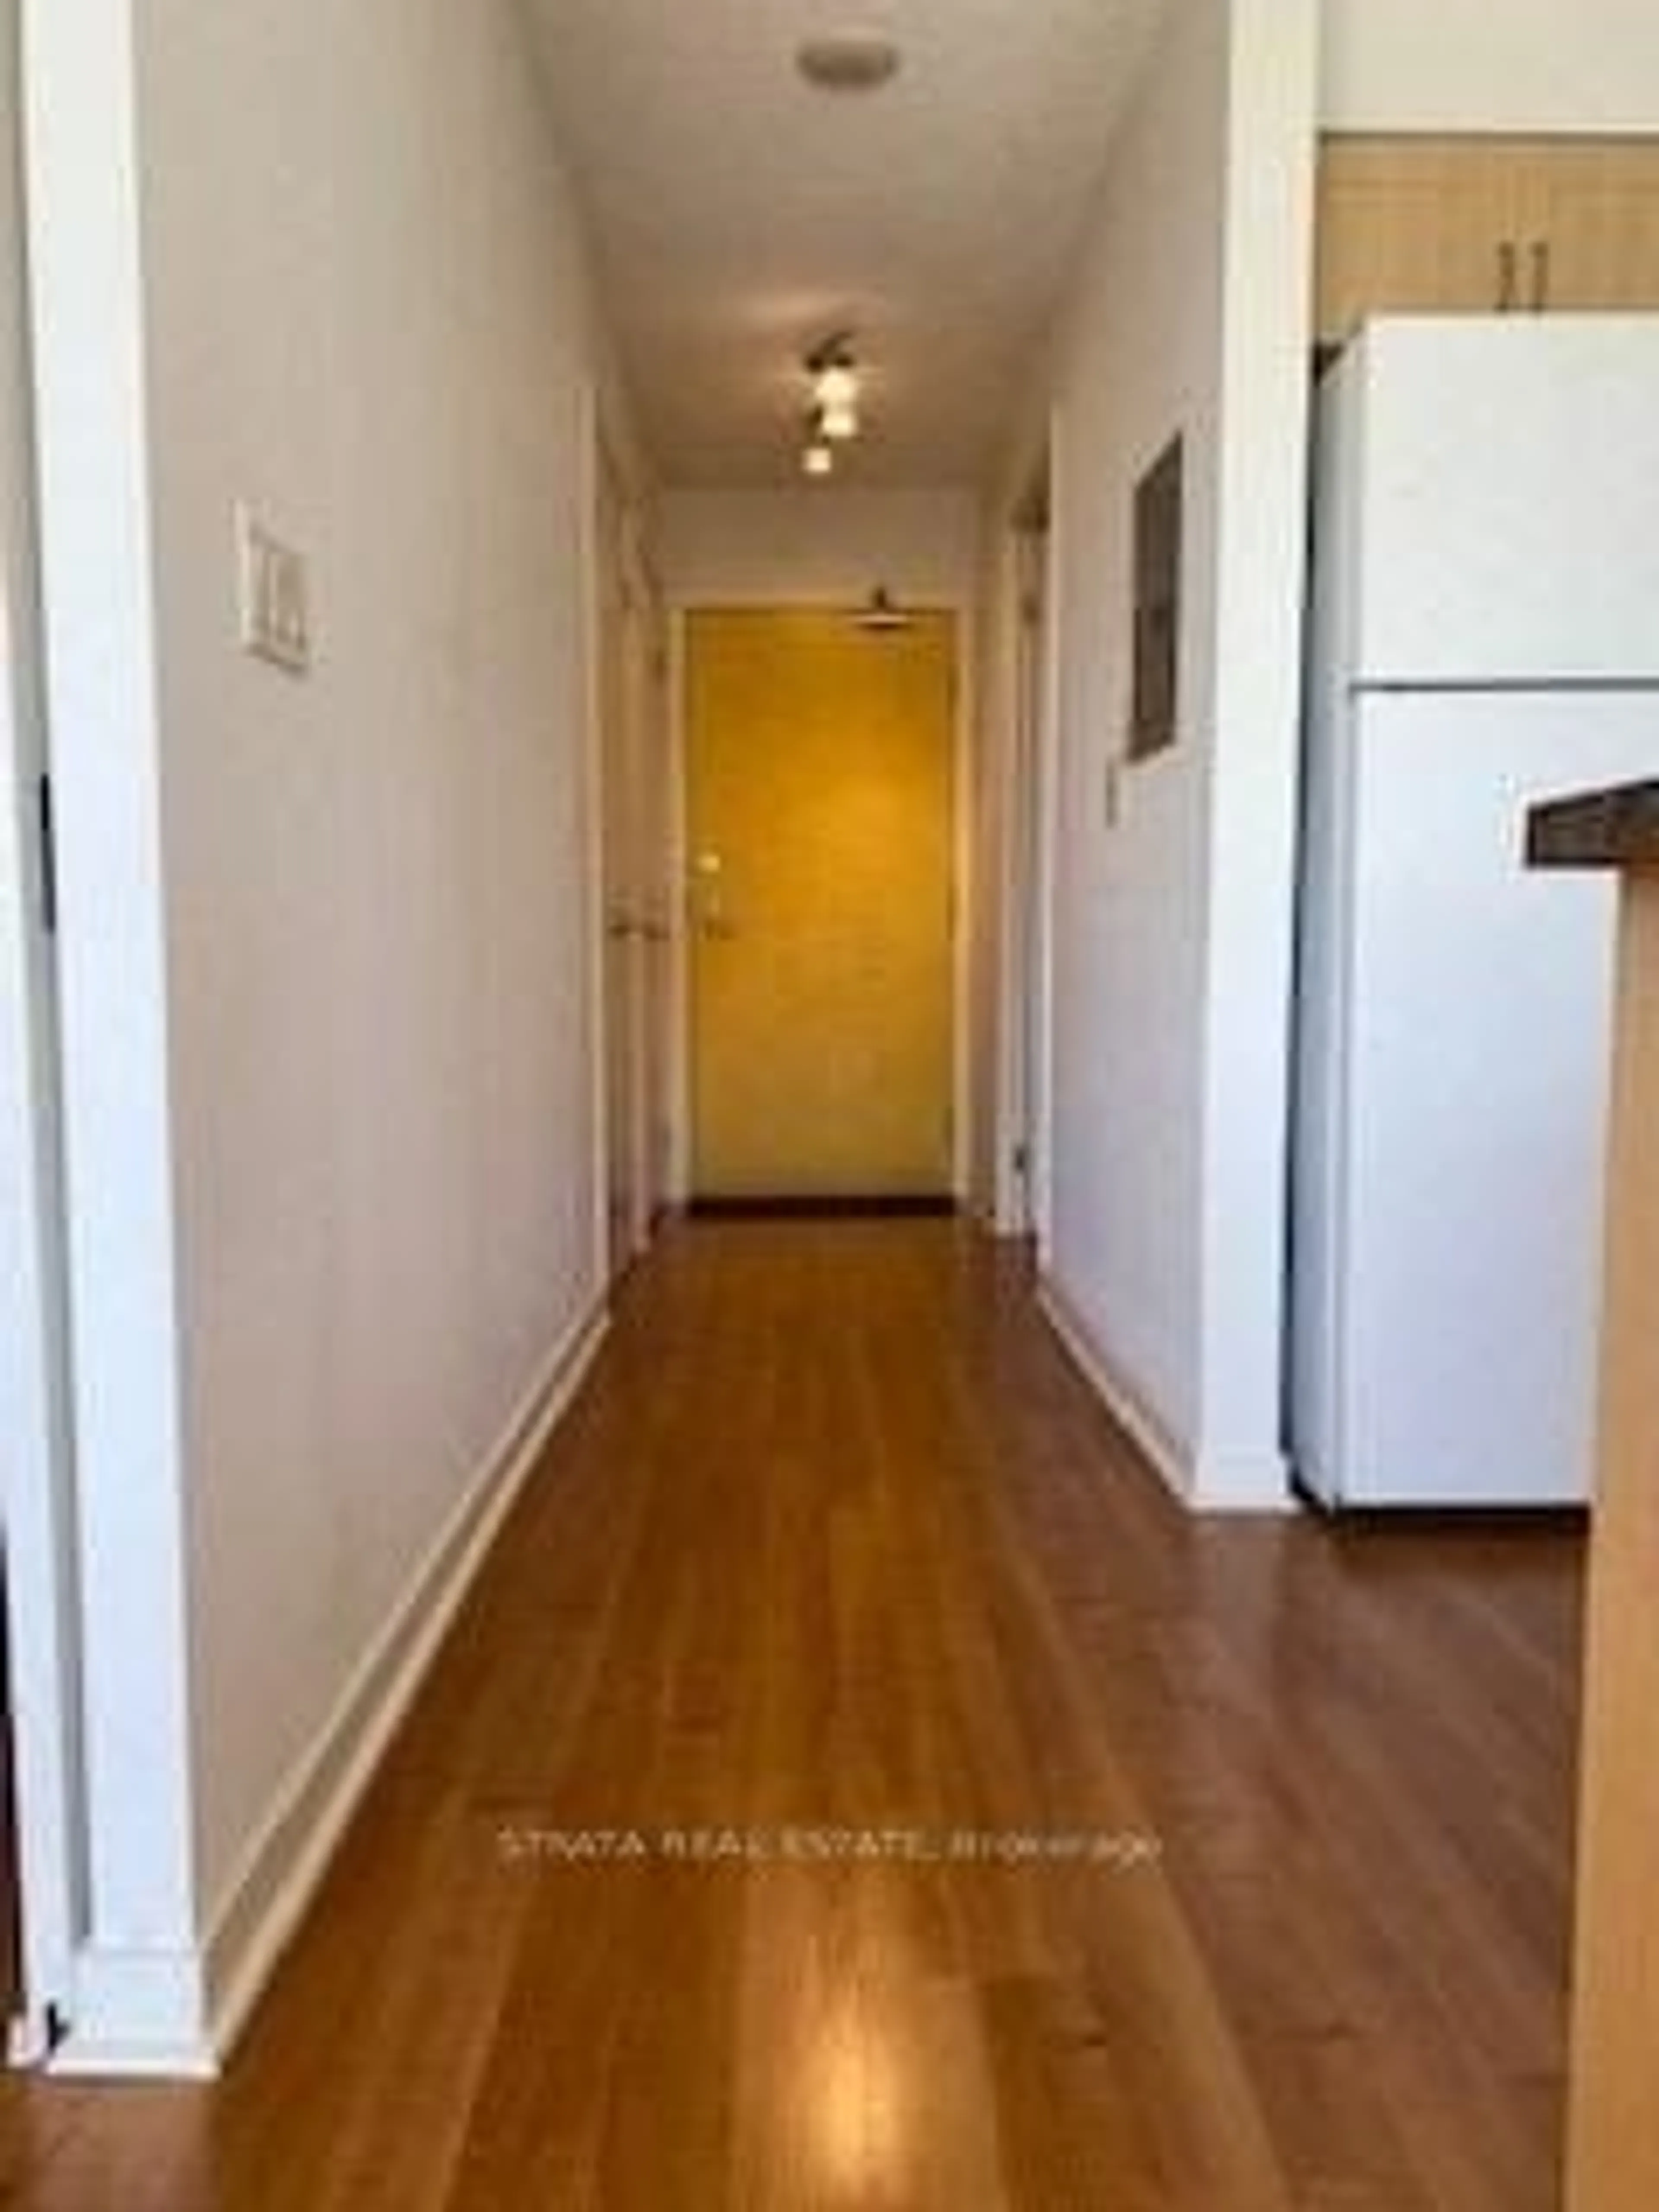 A pic of a room for 76 Shuter St #605, Toronto Ontario M5B 1B4